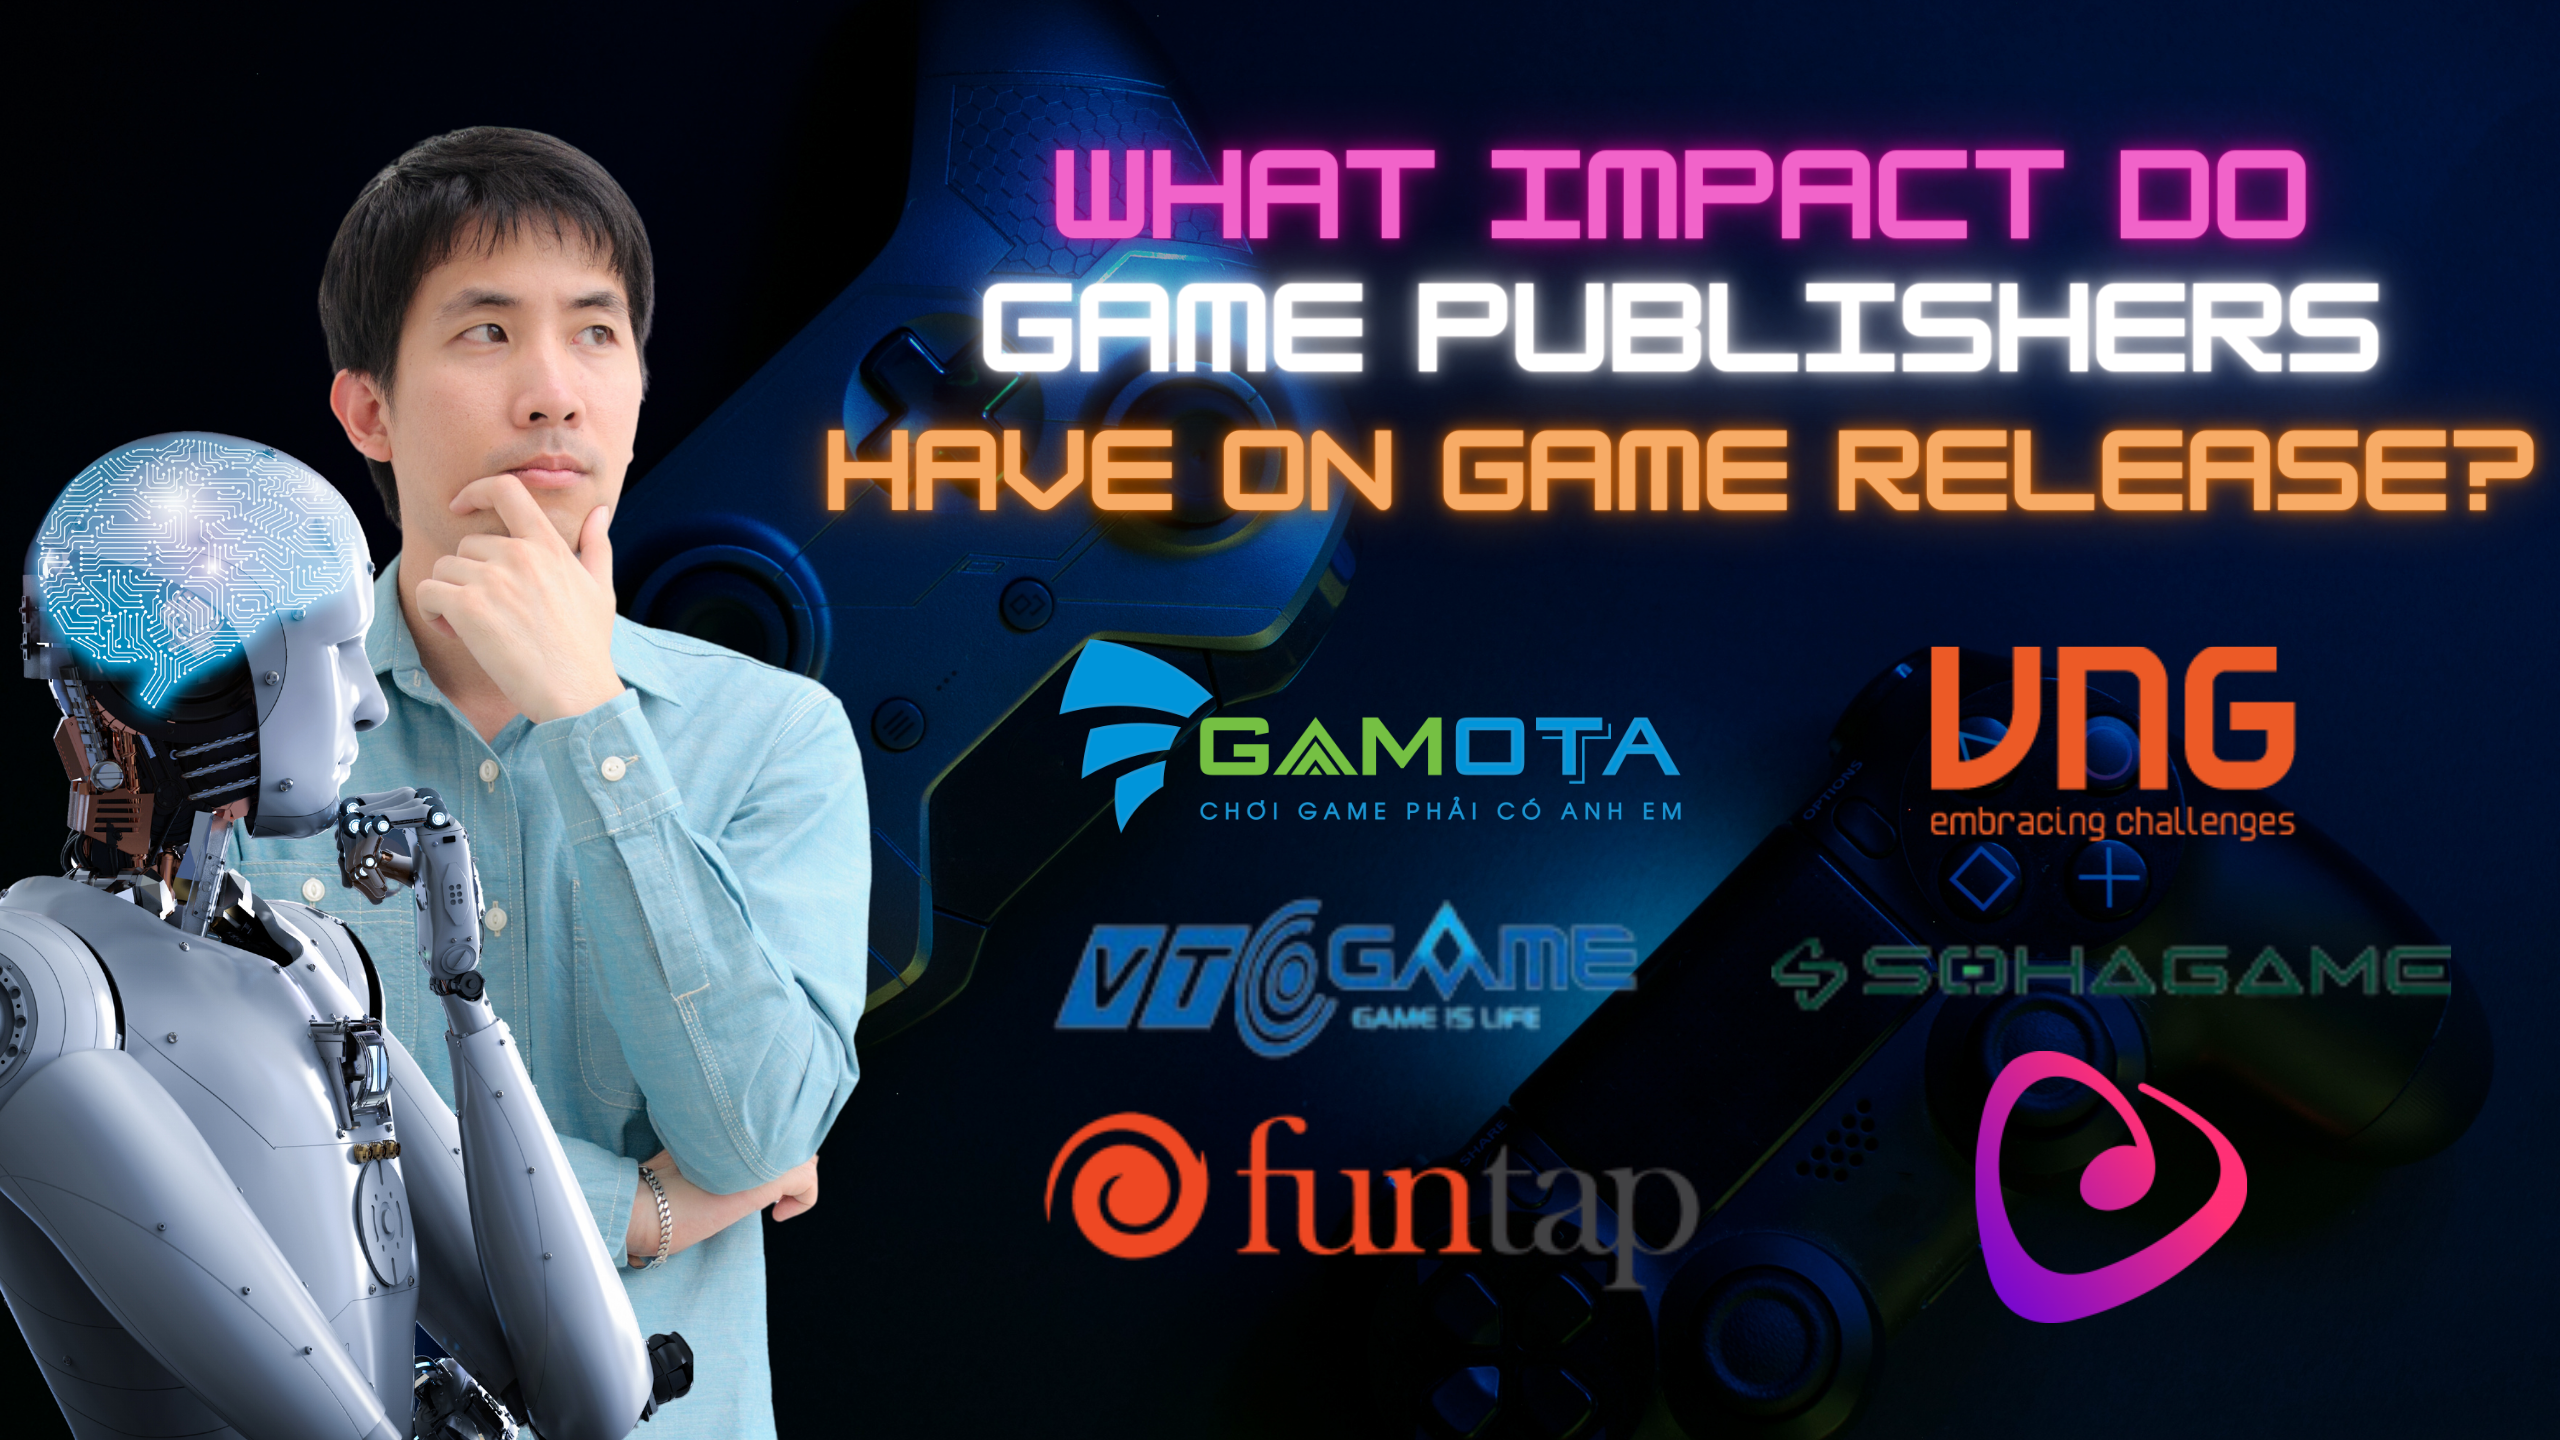 What impact do game publishers have on a game release?